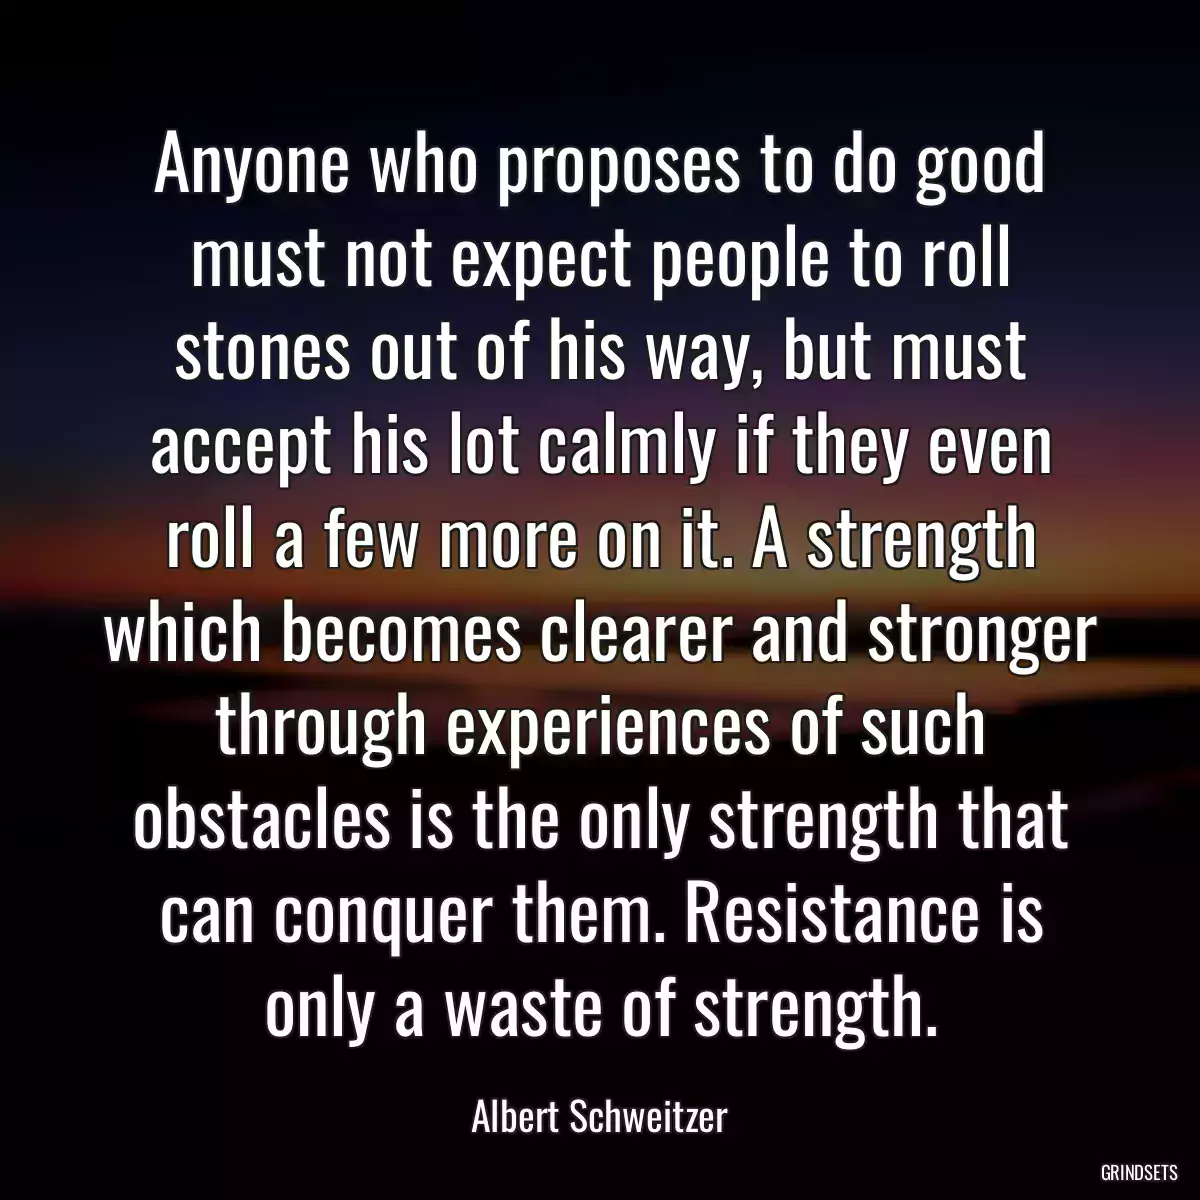 Anyone who proposes to do good must not expect people to roll stones out of his way, but must accept his lot calmly if they even roll a few more on it. A strength which becomes clearer and stronger through experiences of such obstacles is the only strength that can conquer them. Resistance is only a waste of strength.